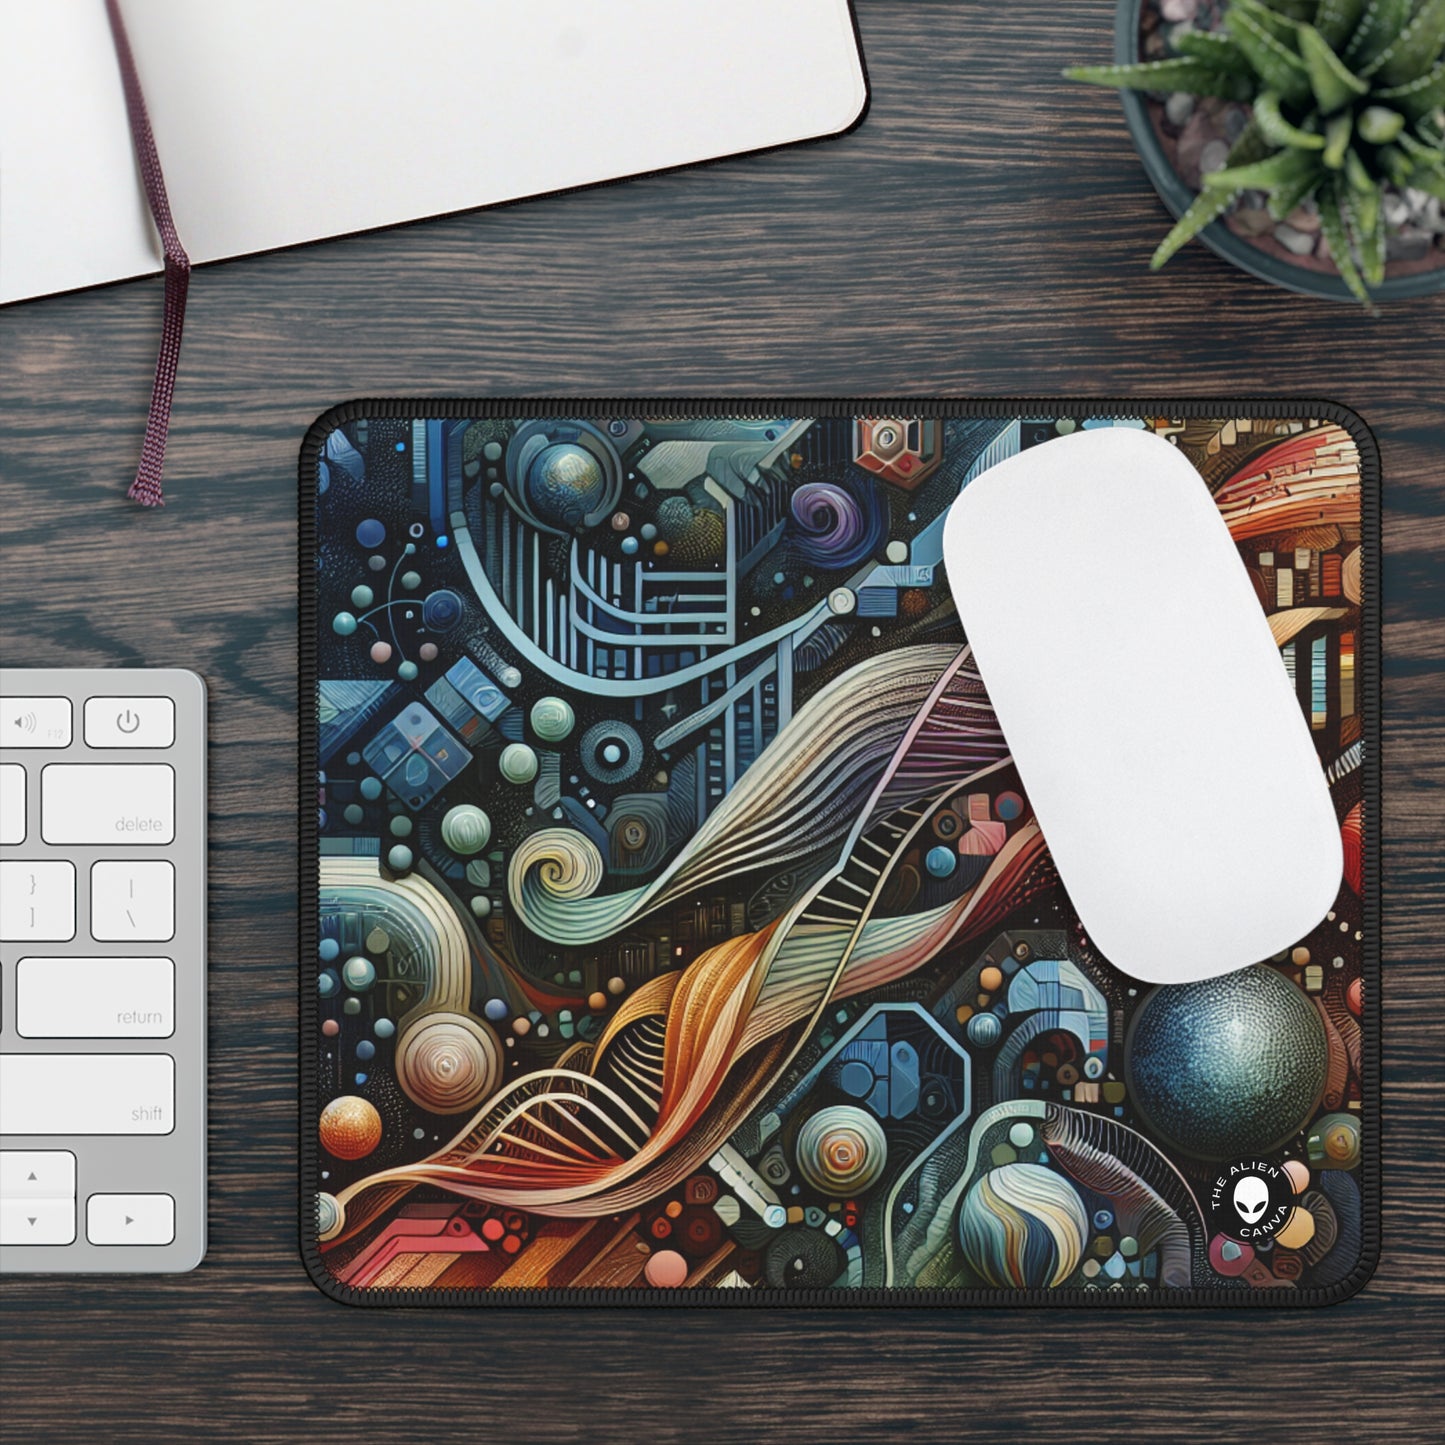 "Bio-Futurism: Butterfly Wing Inspired Art" - The Alien Gaming Mouse Pad Bio Art